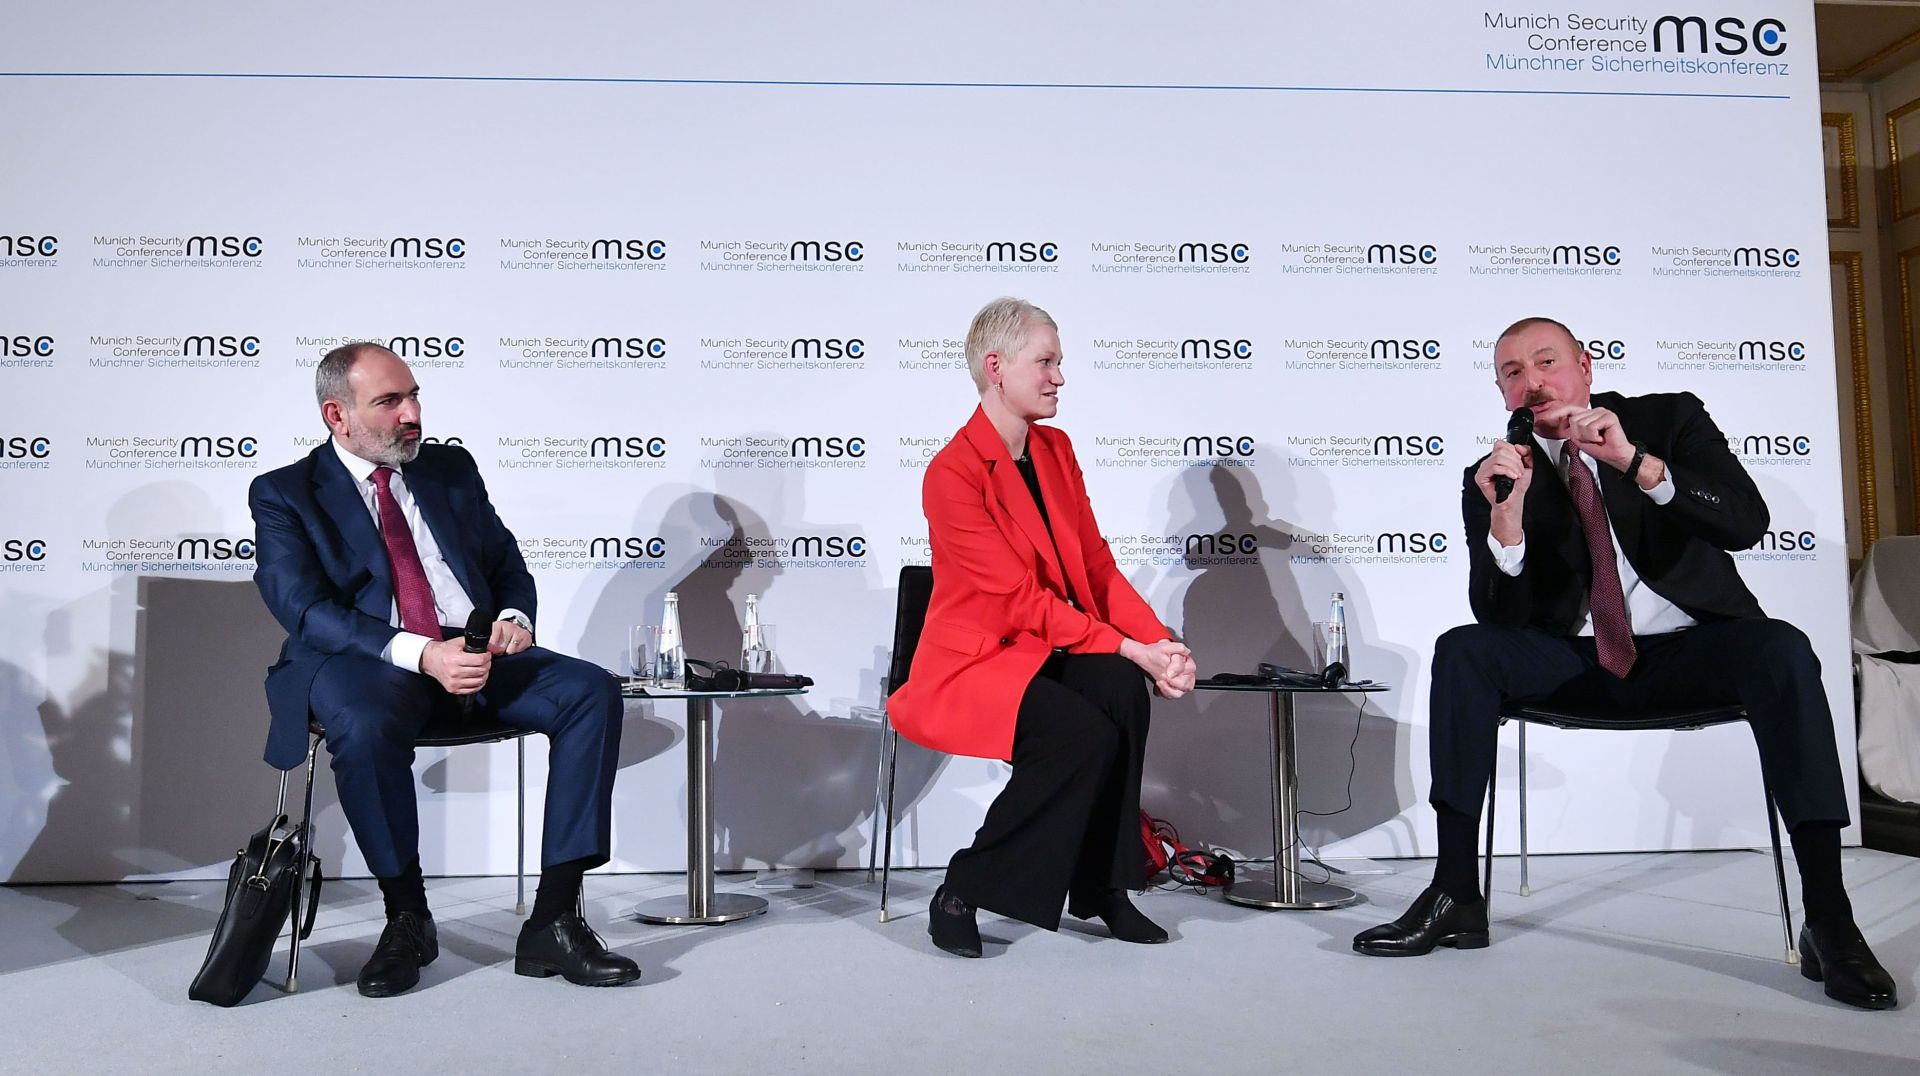 Munich Security Conference features panel discussions on Armenia-Azerbaijan Nagorno-Karabakh conflict (PHOTO/VIDEO)